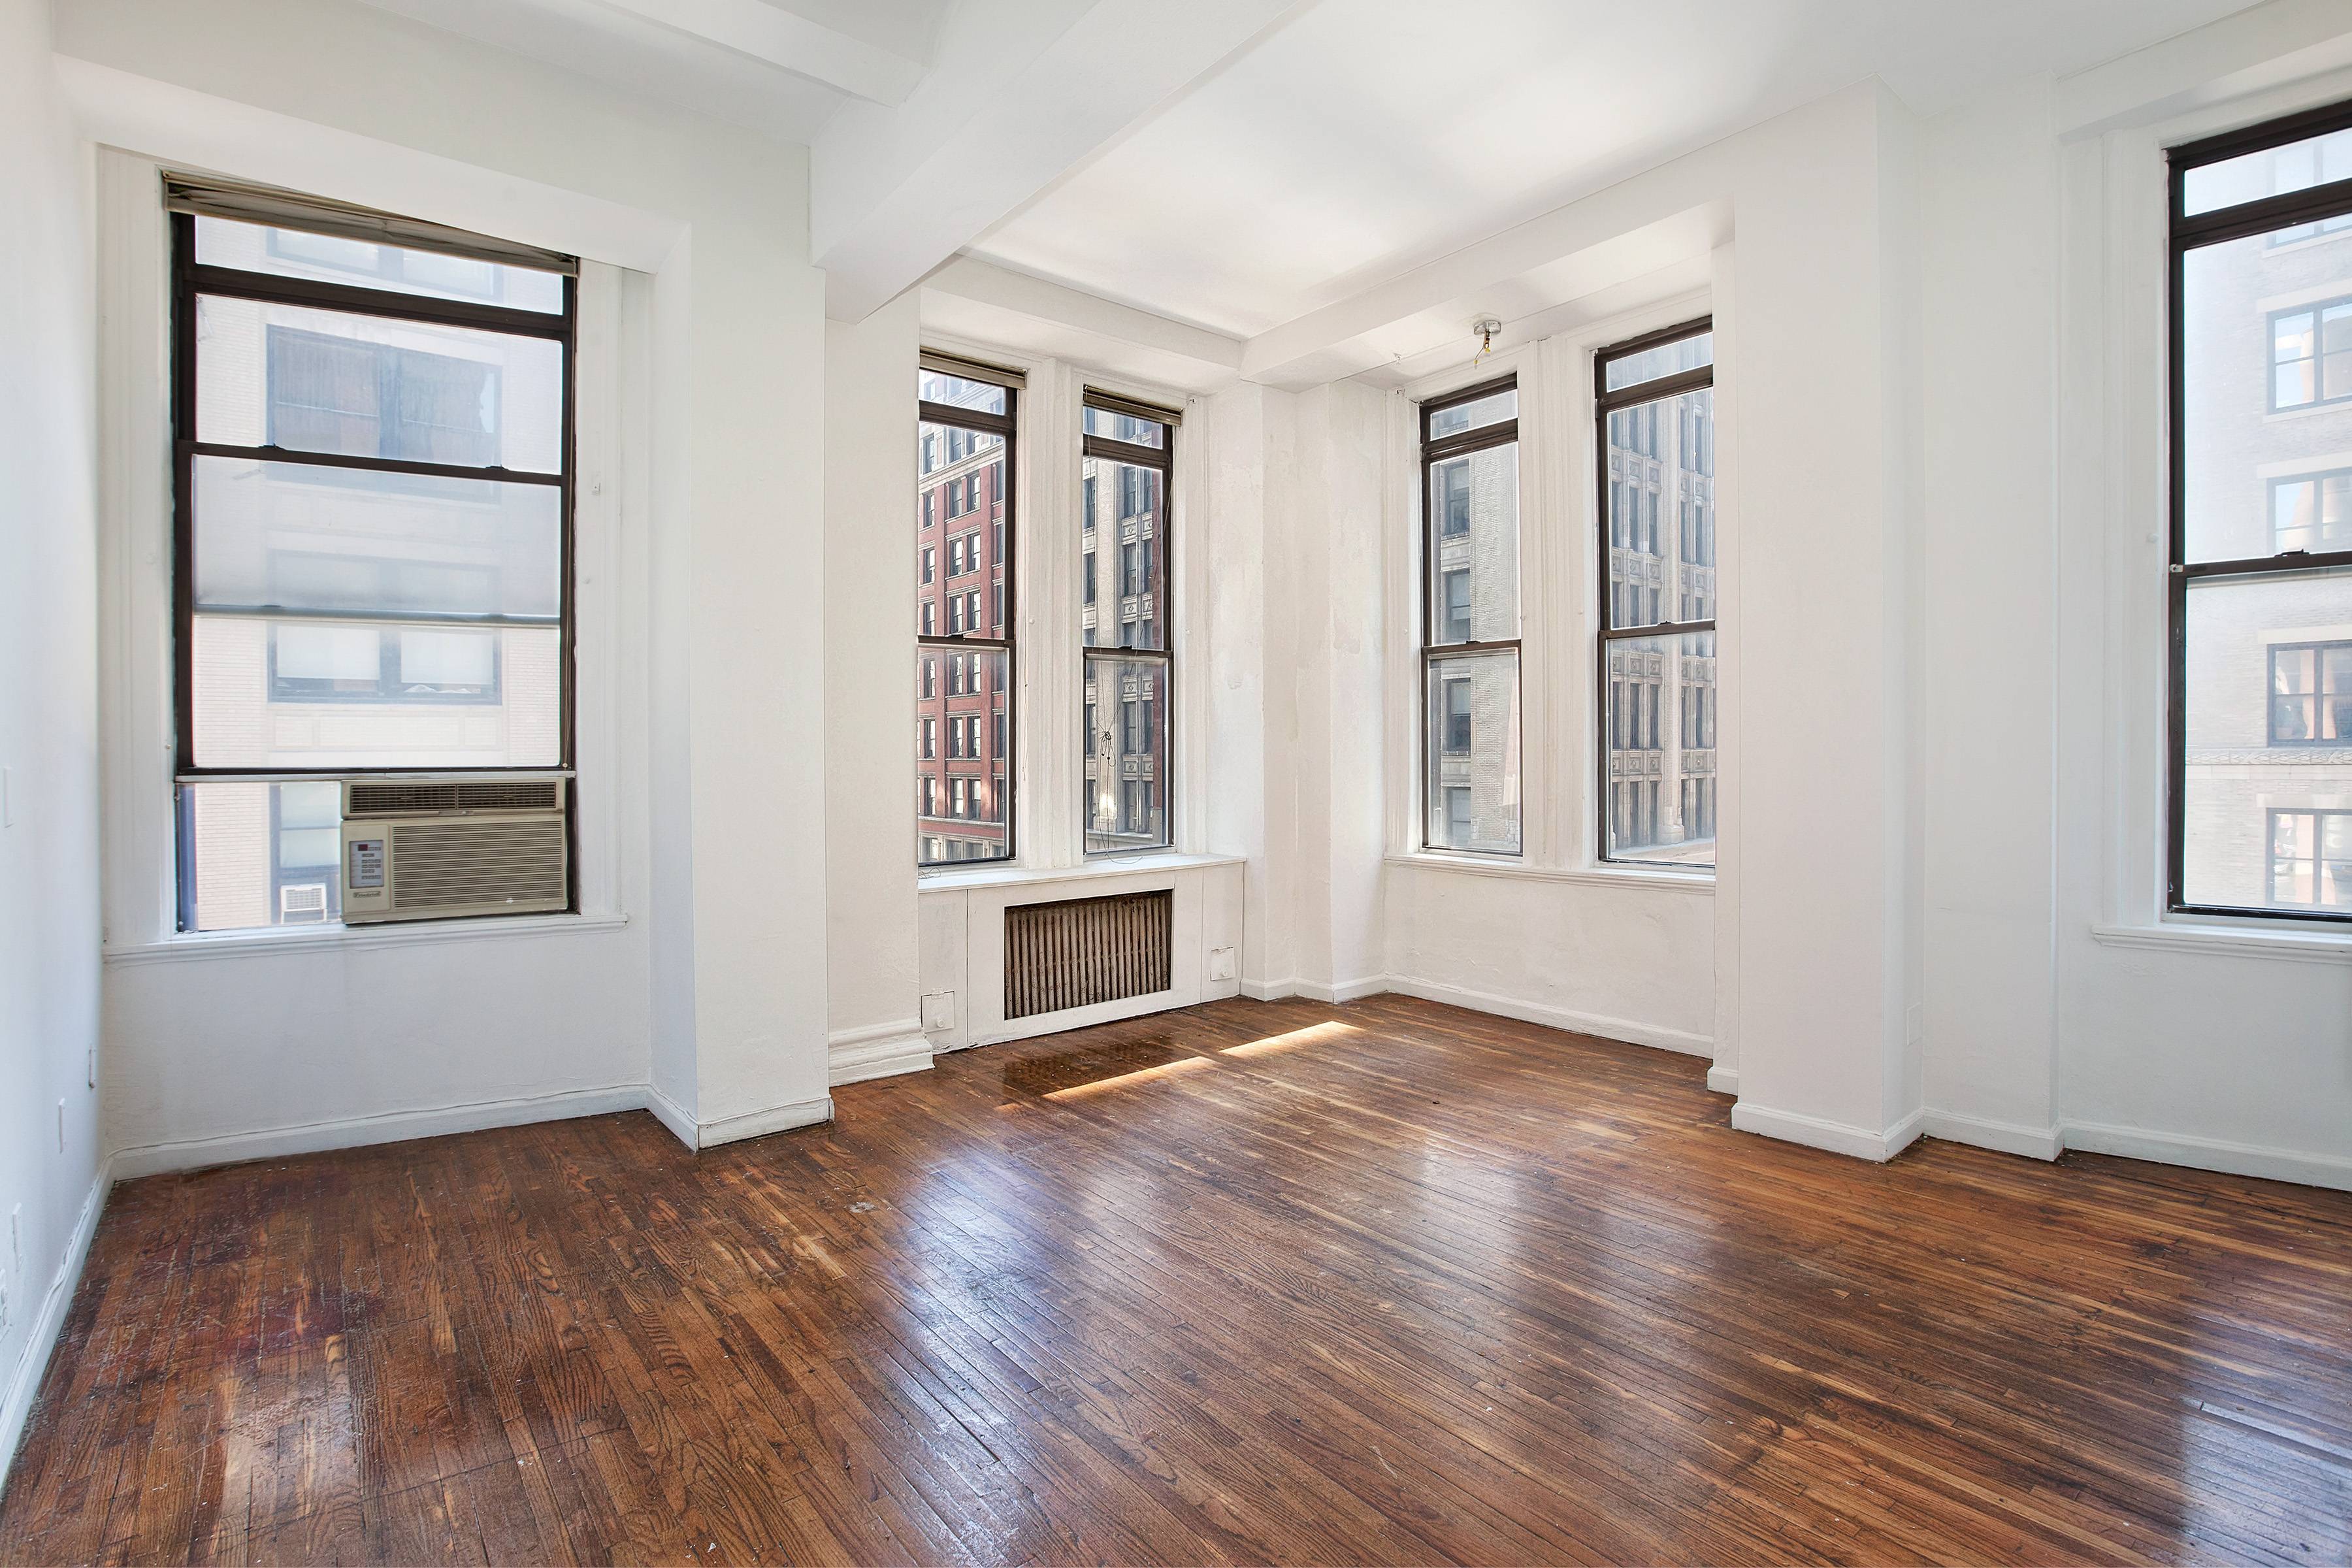 Flatiron Super-Sized LOFT (4) Over-Sized Windows Sun-Blasted 12FT Ceilings North & Eastern Exposure Pet Friendly Close to Union Square